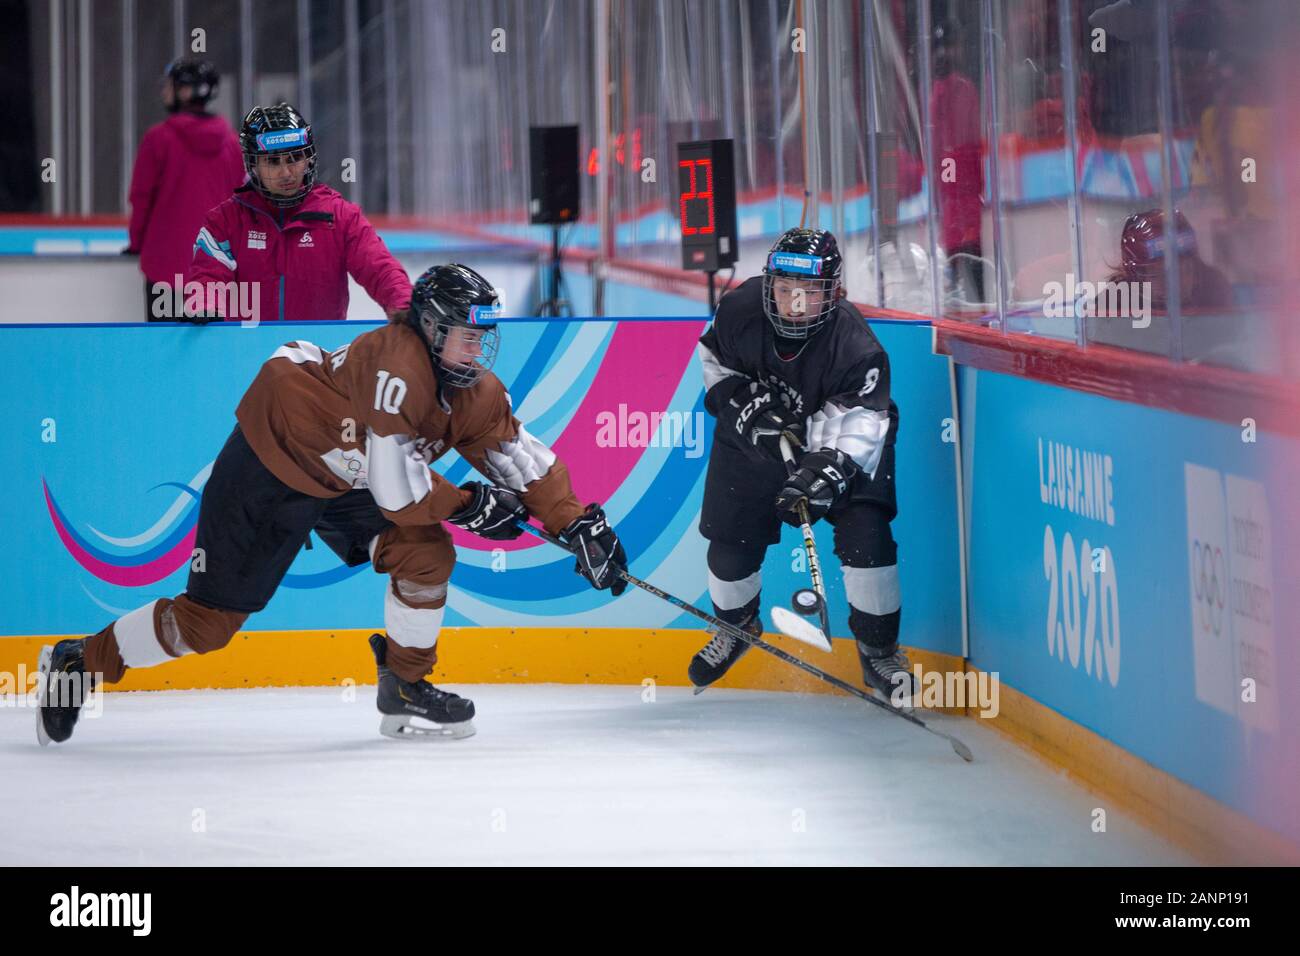 Team GB’s Amy Robery (15) competes in the Lausanne 2020 women's Ice Hockey mixed NOC 3 on 3 tournament preliminary round on the 10th January 2020 Stock Photo